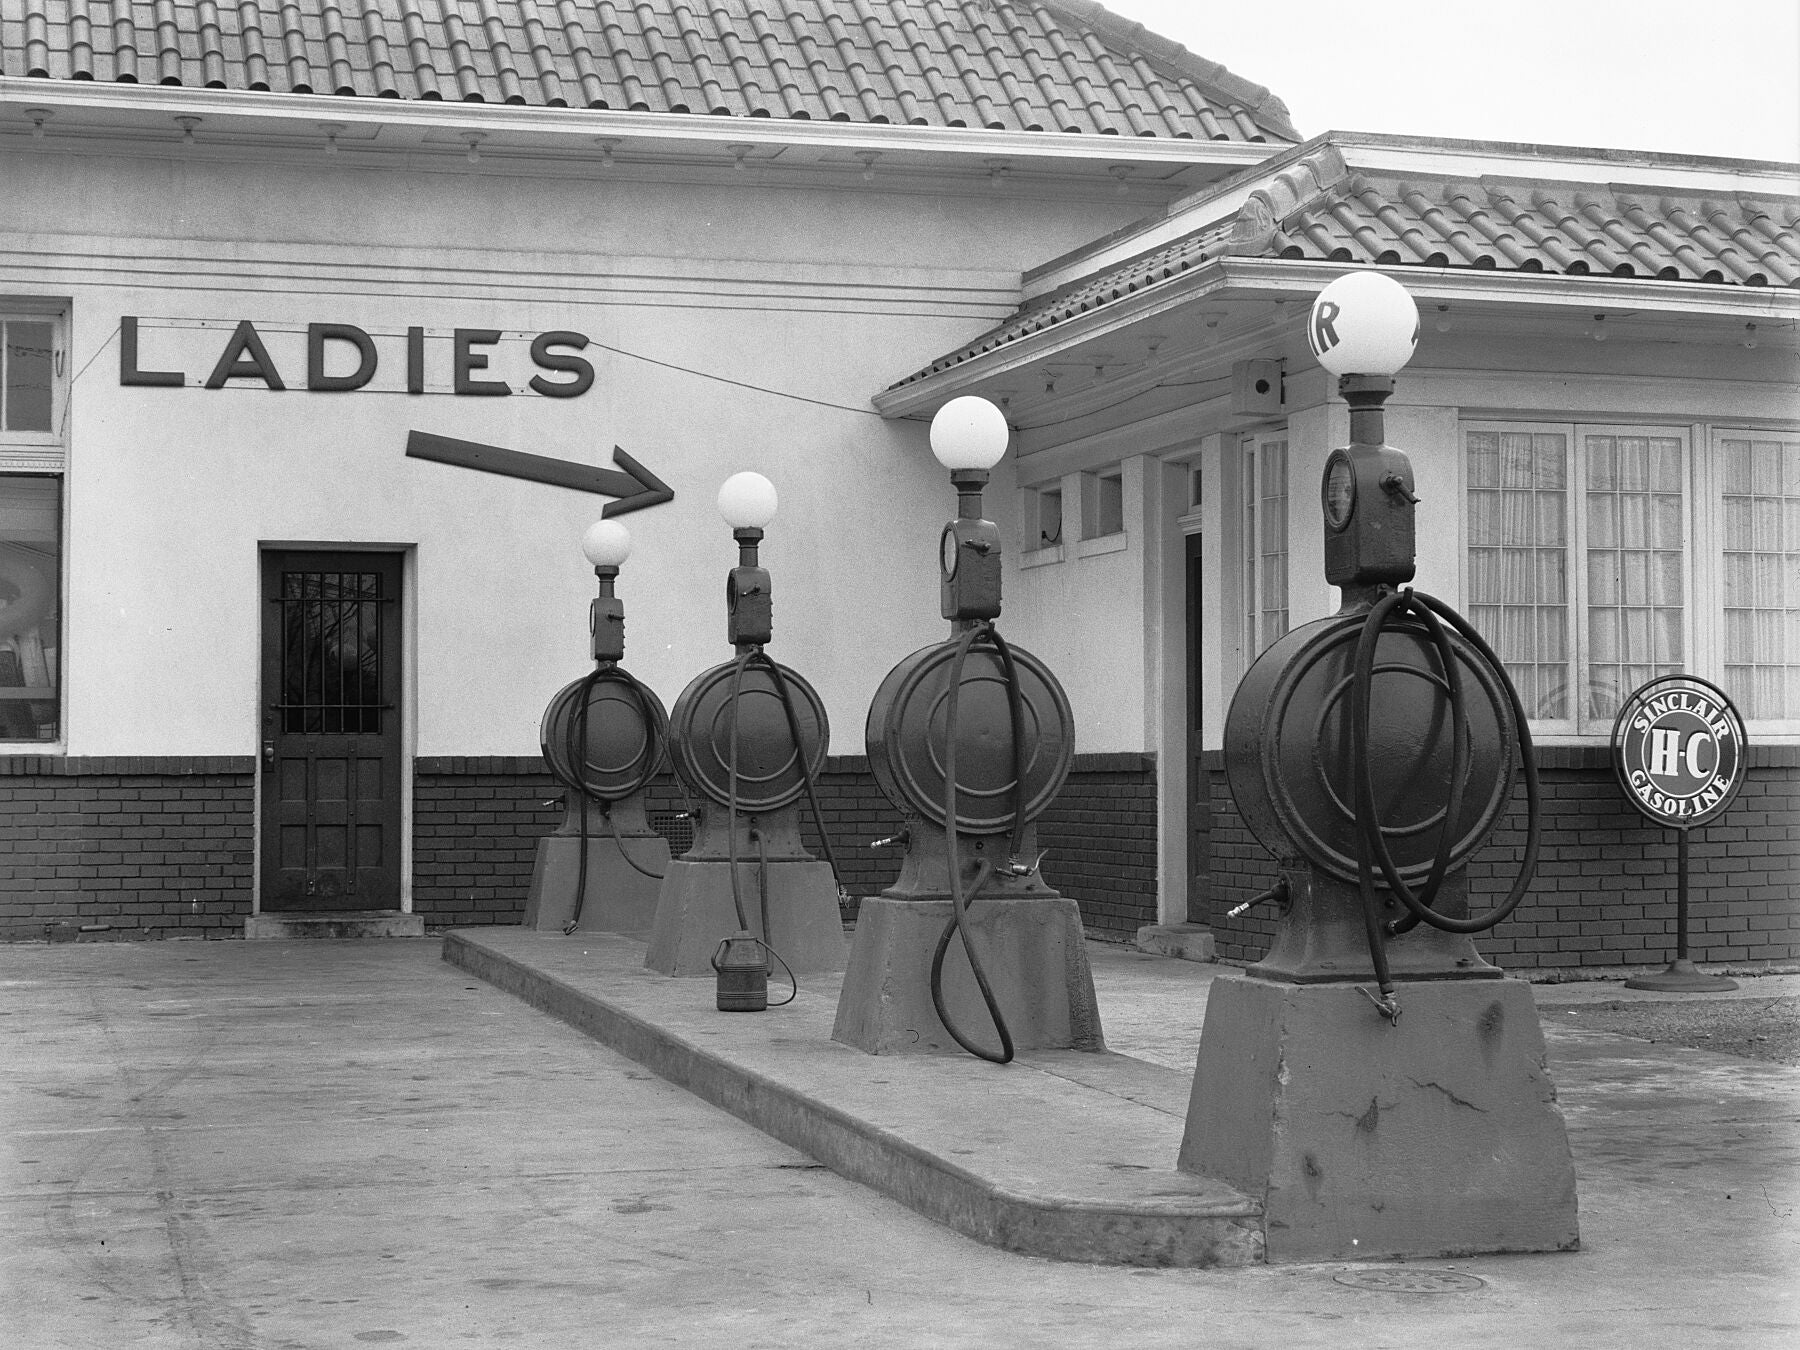 Gas station in Washington, D.C. by David Myers - 1939